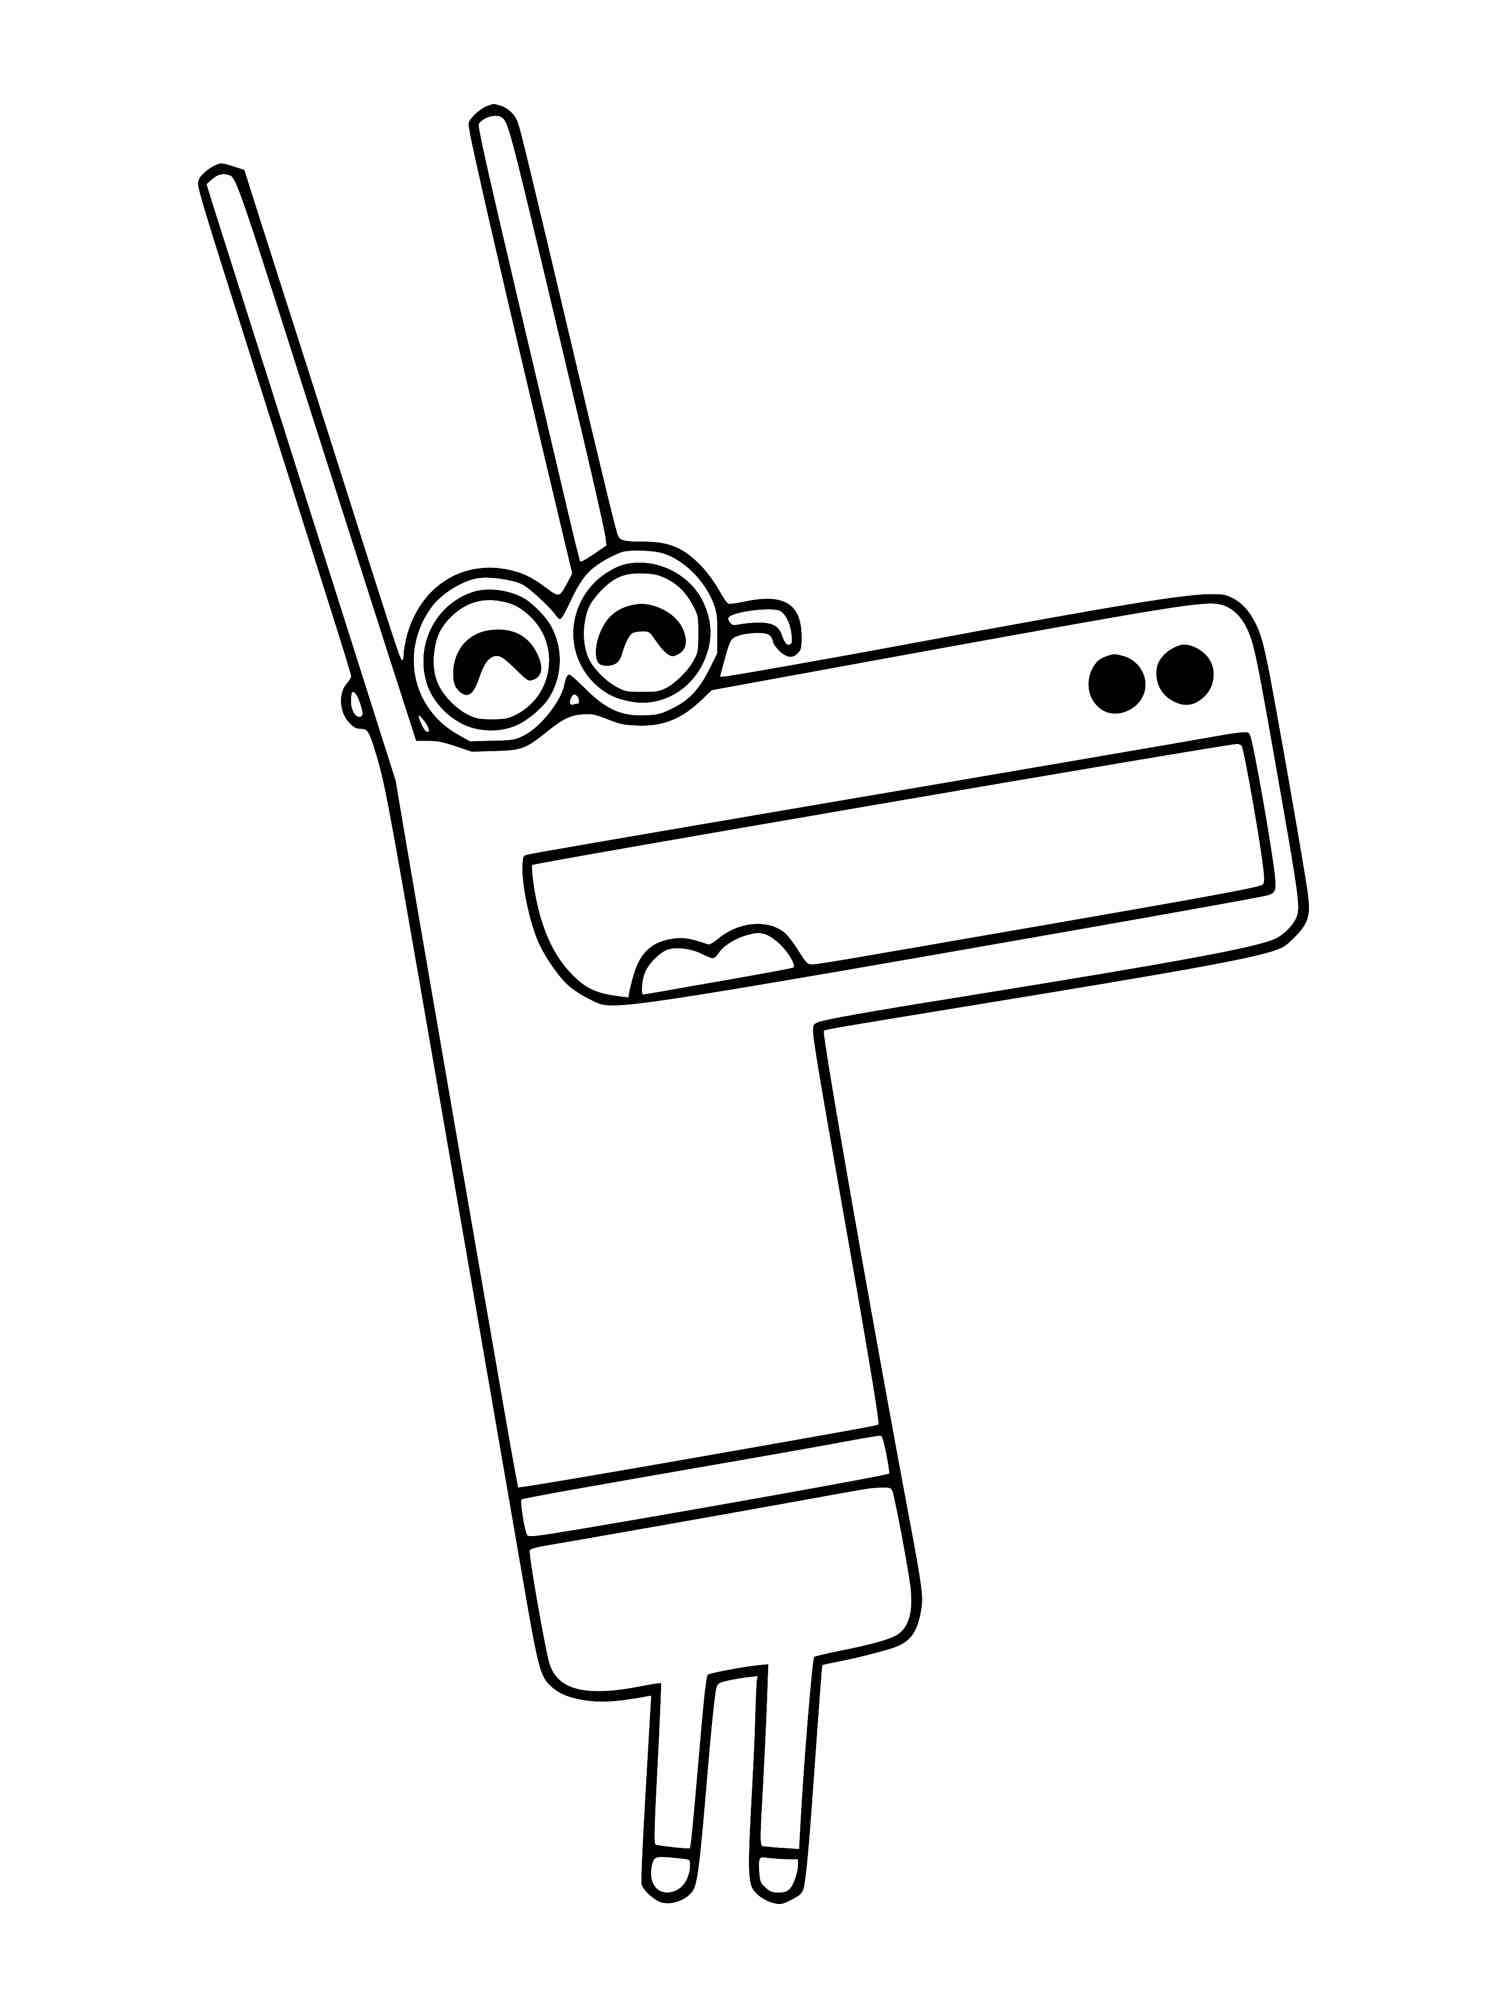 Happy Crocodile from Hey Duggee coloring page